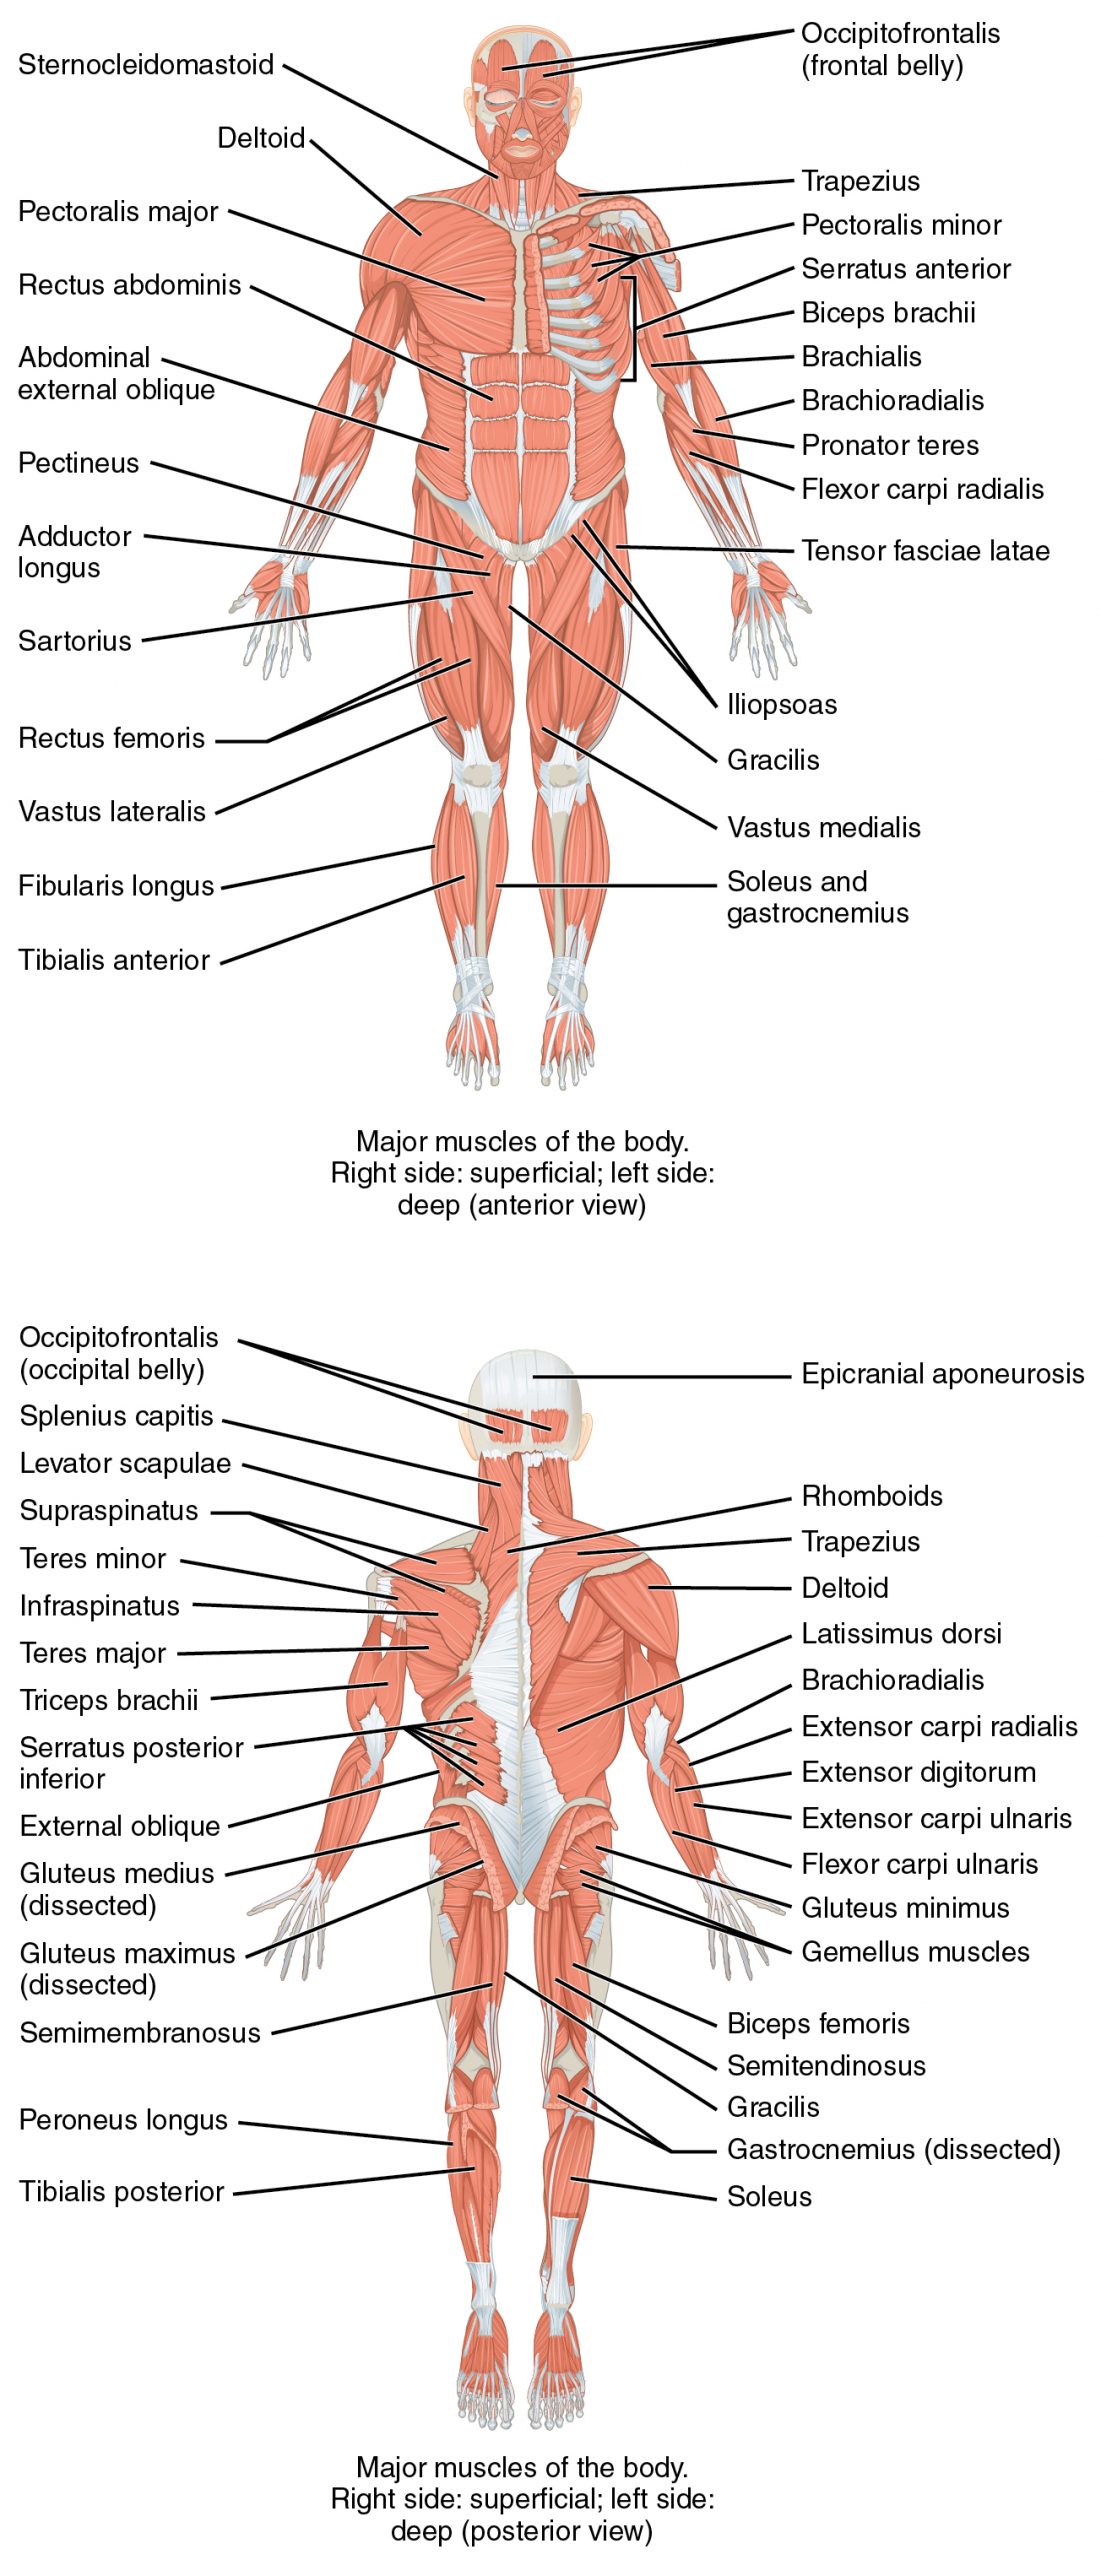 Illustration showing anterior and posterior views of skeletal muscle, with labels